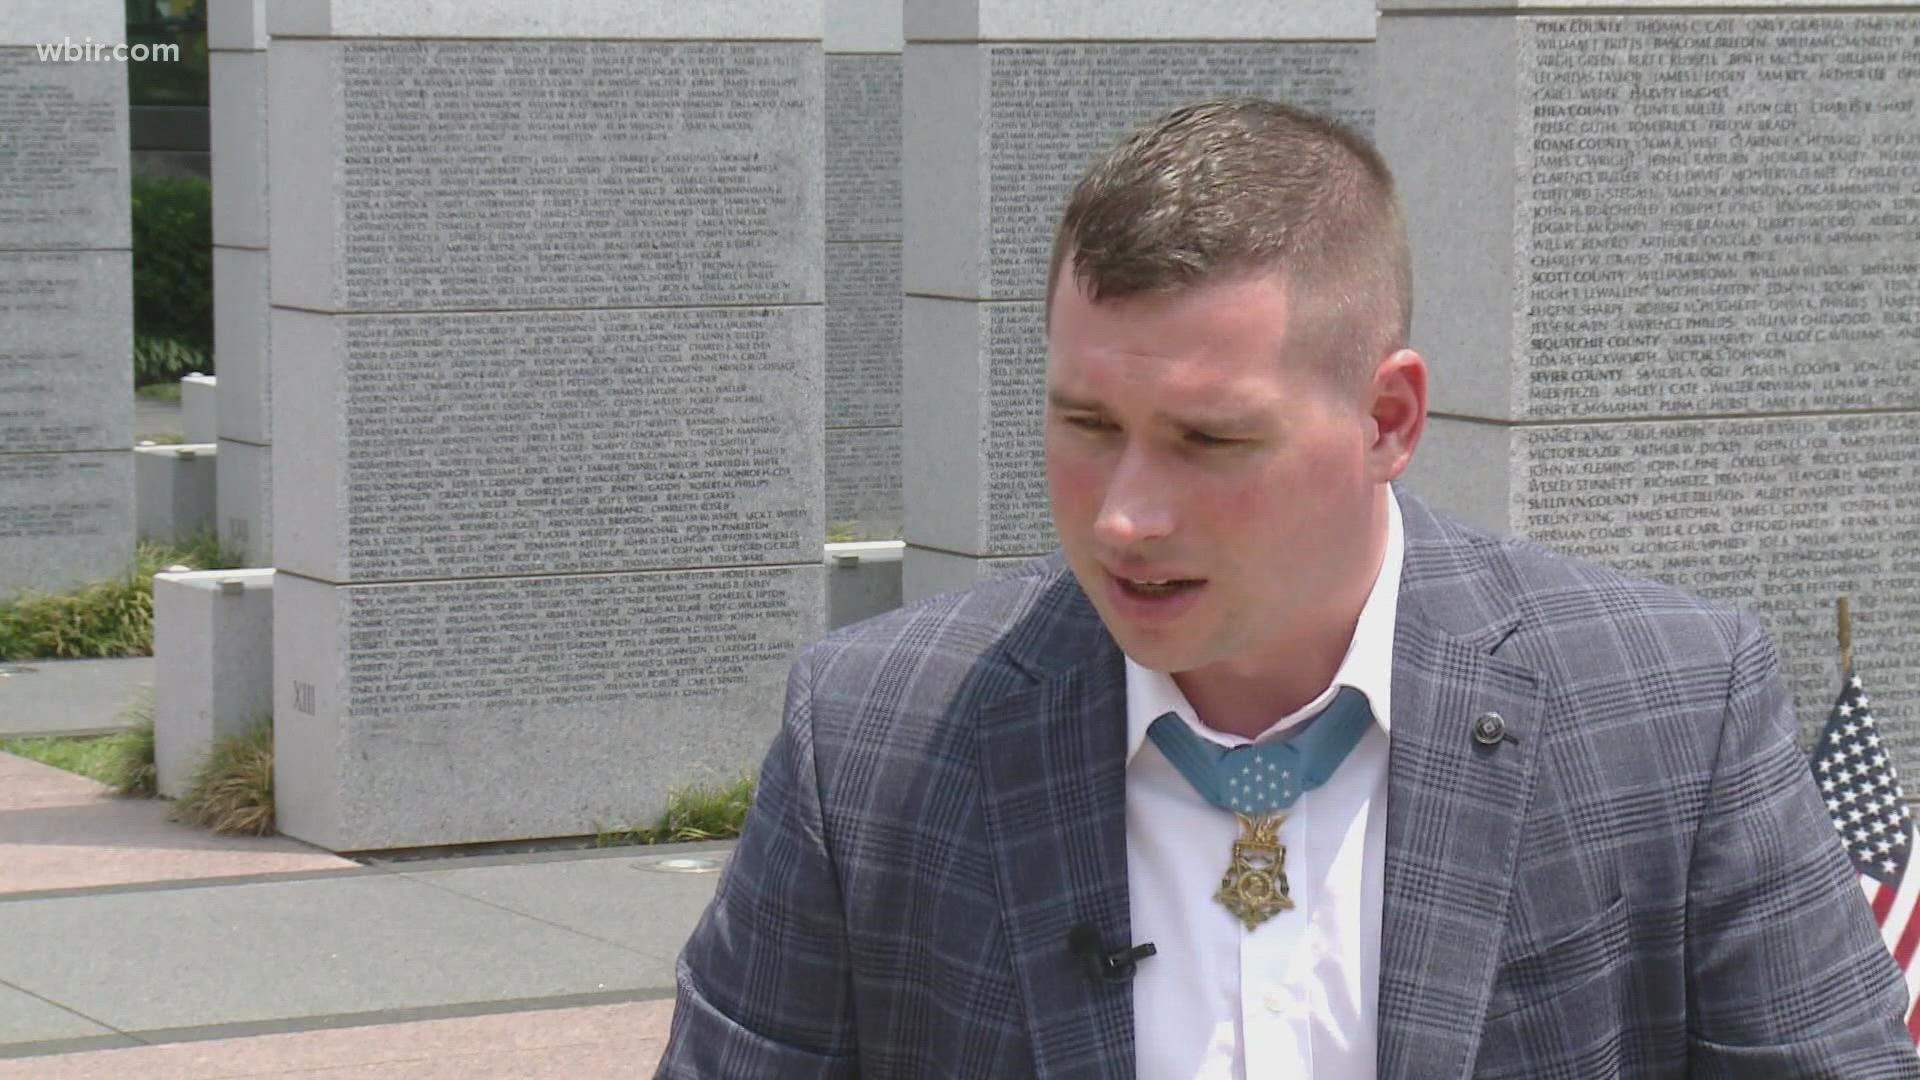 Kyle White was celebrated by an entire country for his heroism in battle, but the Medal of Honor recipient remembers November 9, 2007 as the worst day of his life.